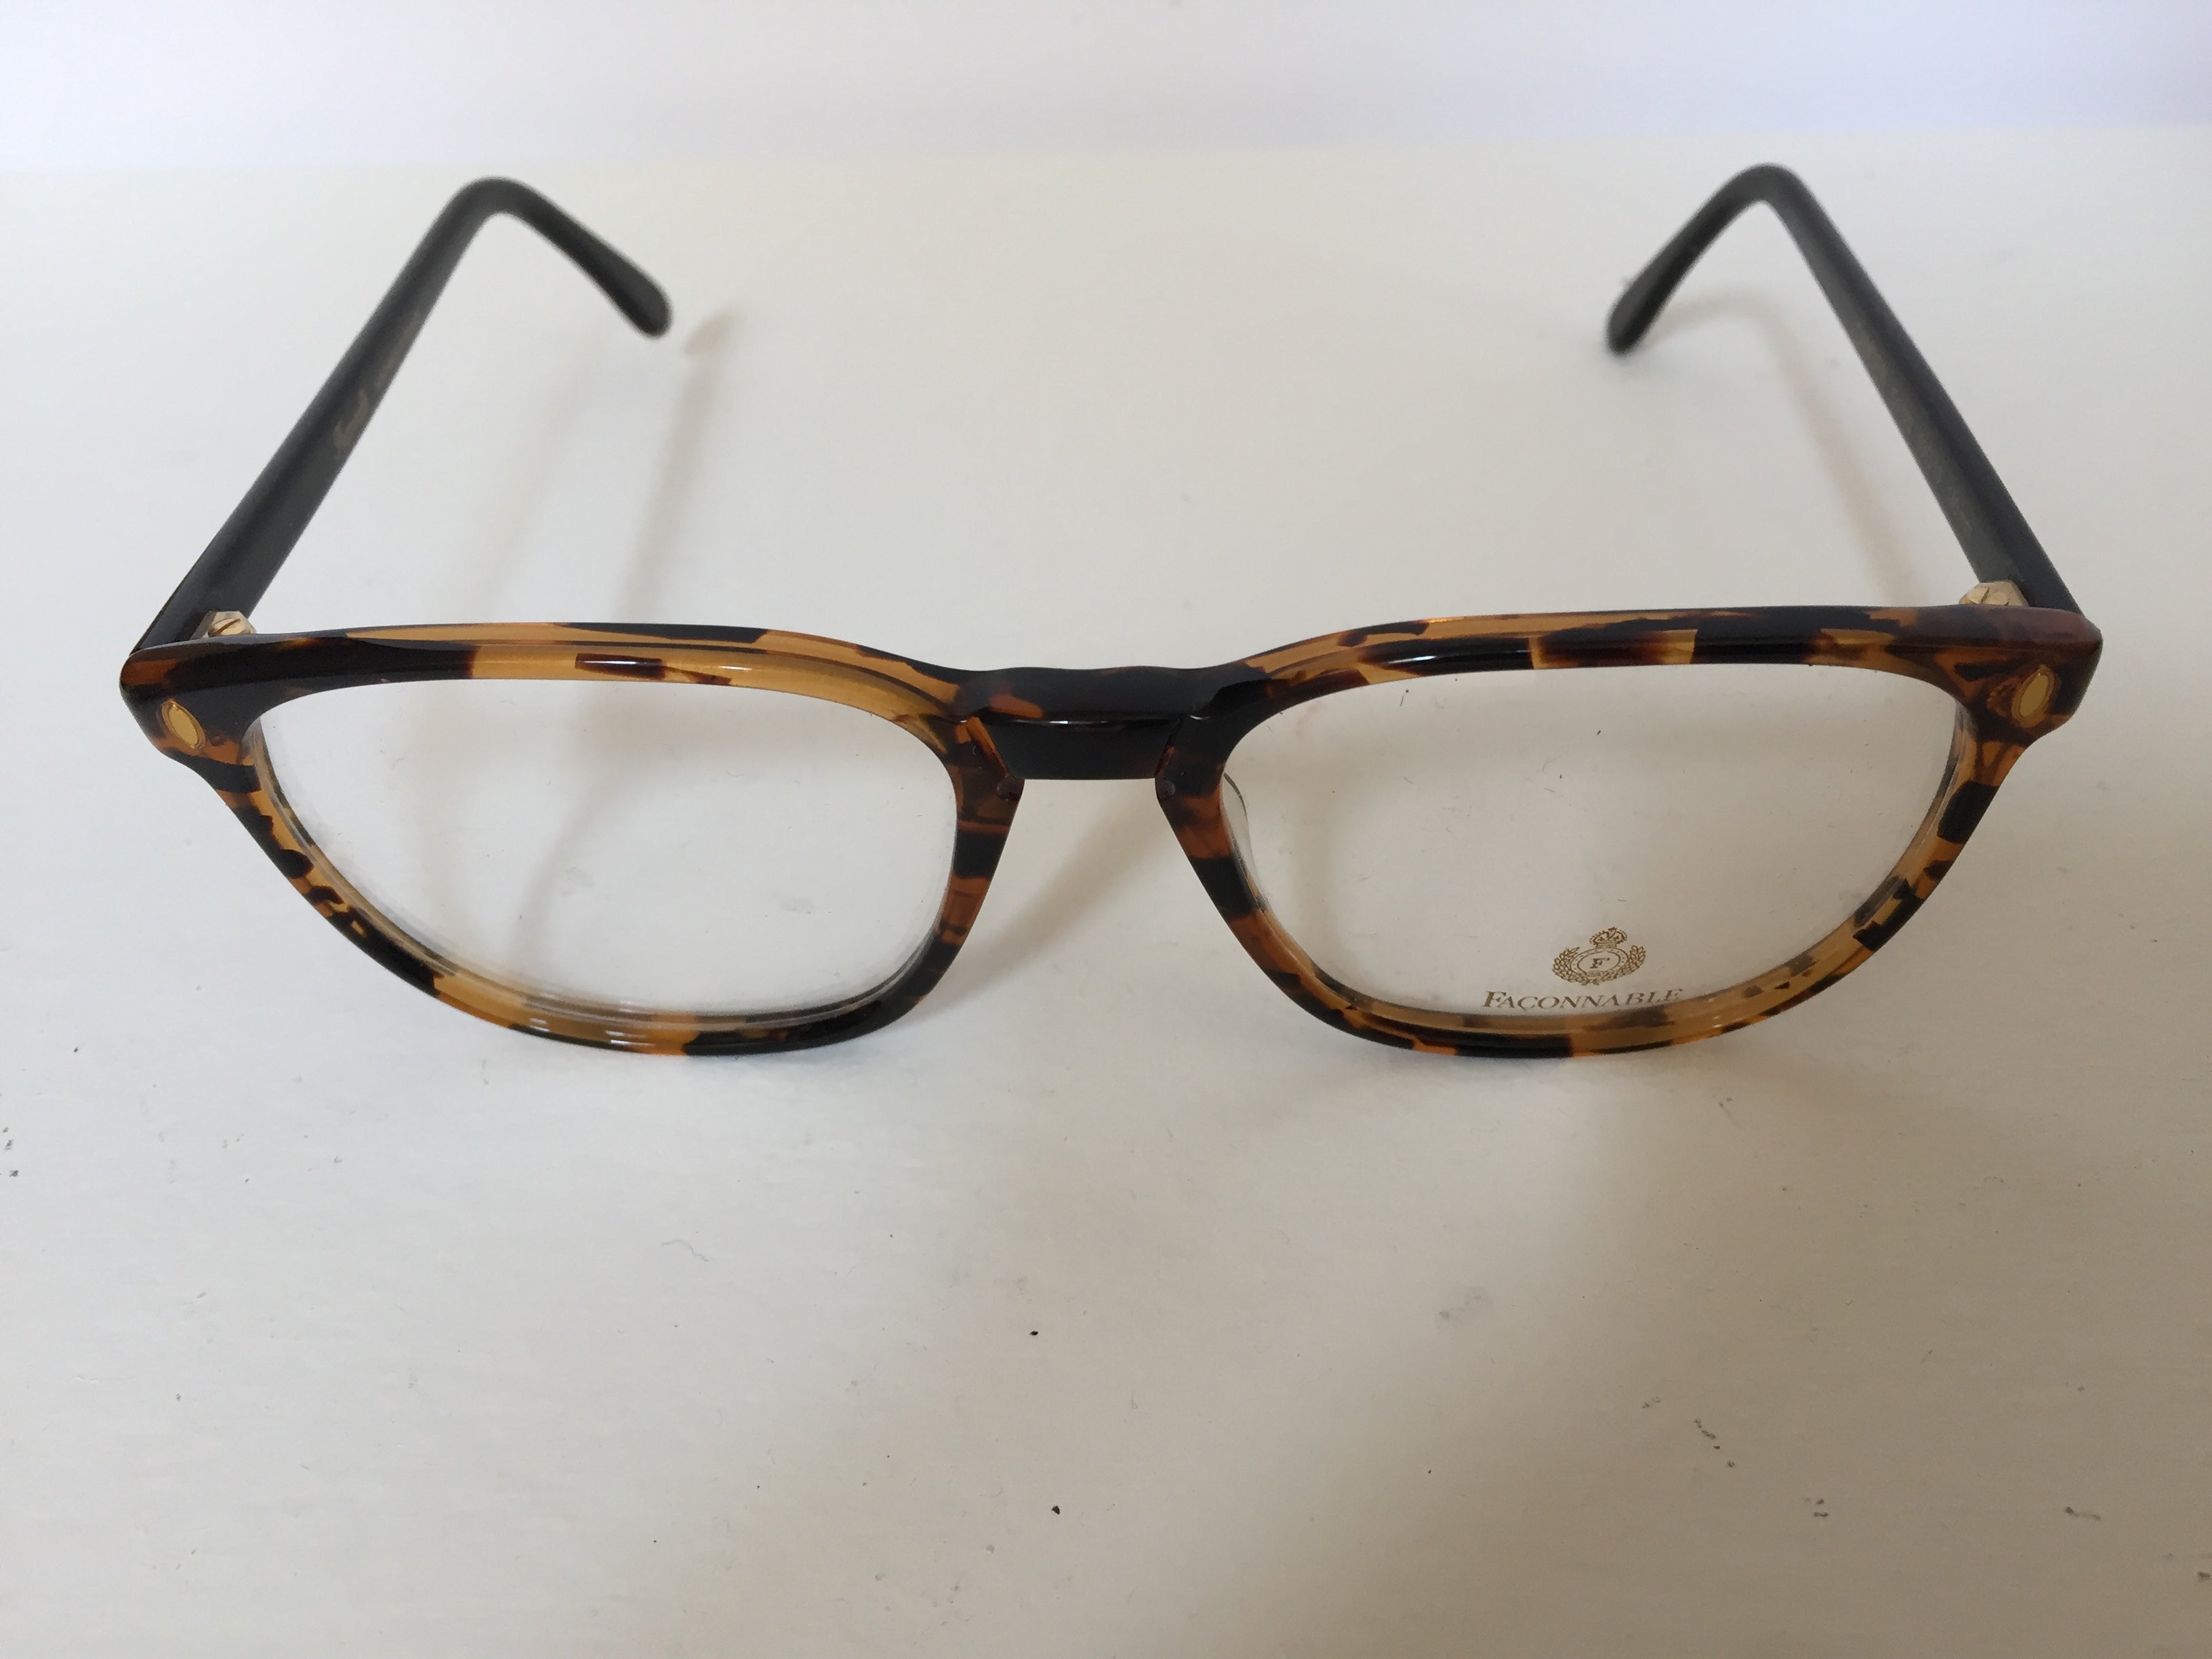 Vintage Faconnable eyeglasses.
Vintage glasses Faconnable circa 1980s
Glasses are delivered without a case.
Have an optician adjust your glasses correctly so that they fit well.
New old stock eyeglasses, man, Faconnable eyewear, unisex.